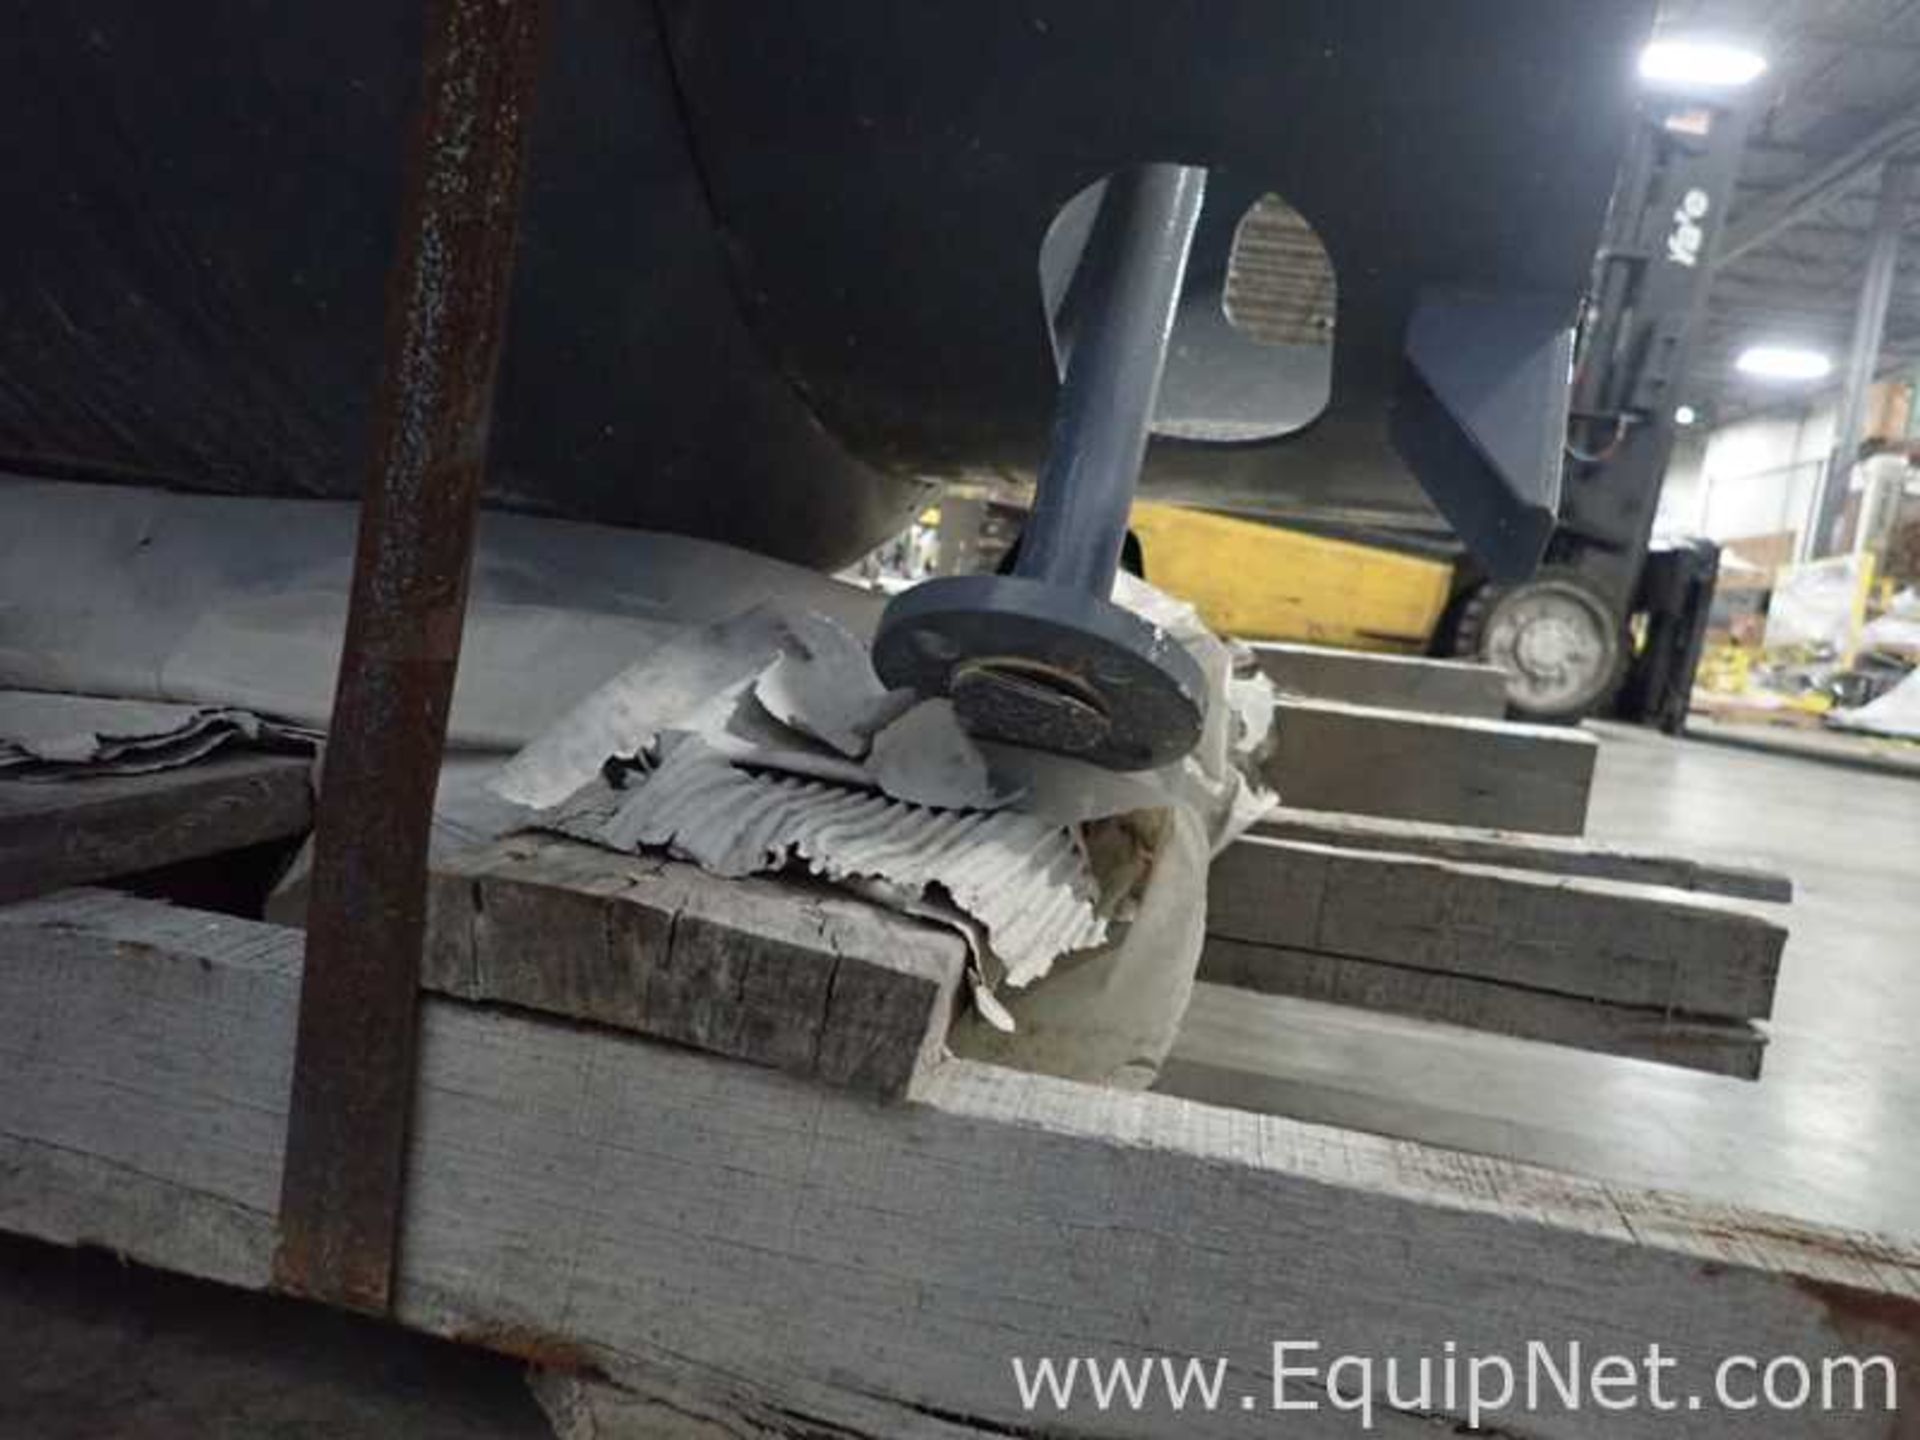 EQUIPNET LISTING #765750; REMOVAL COST: $40; DESCRIPTION: Steel Fab Carbon Steel Receiving Tank - Image 7 of 8